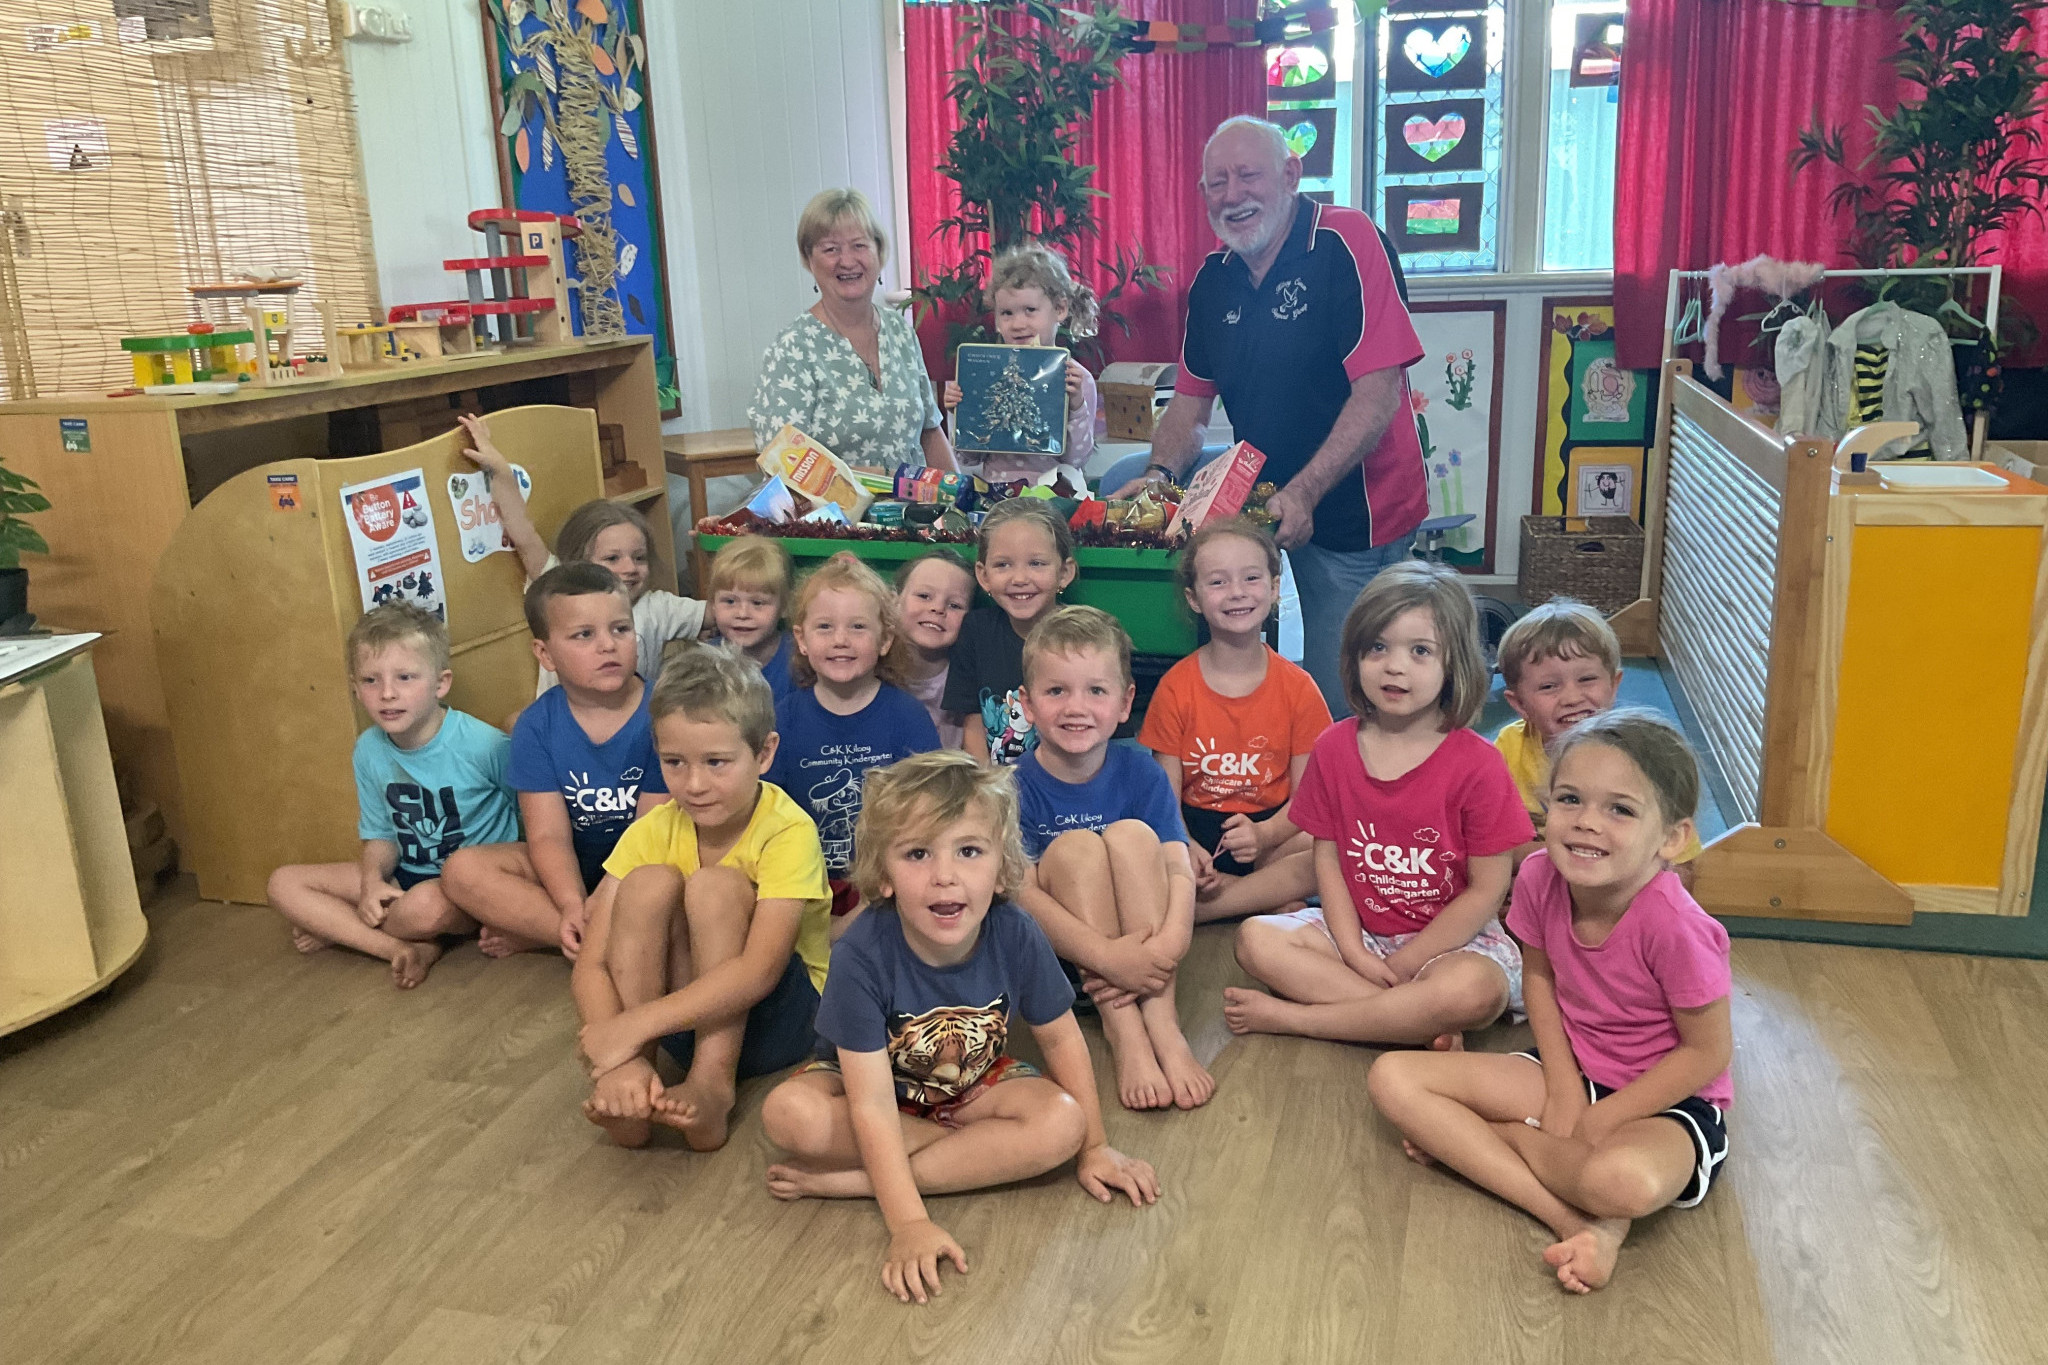 John Robinson from the Kilcoy Cancer Support Group ‘Breast and the Rest’, pictured with children from C&K Kilcoy Community Kindergarten as the kindergarten supported this charity.